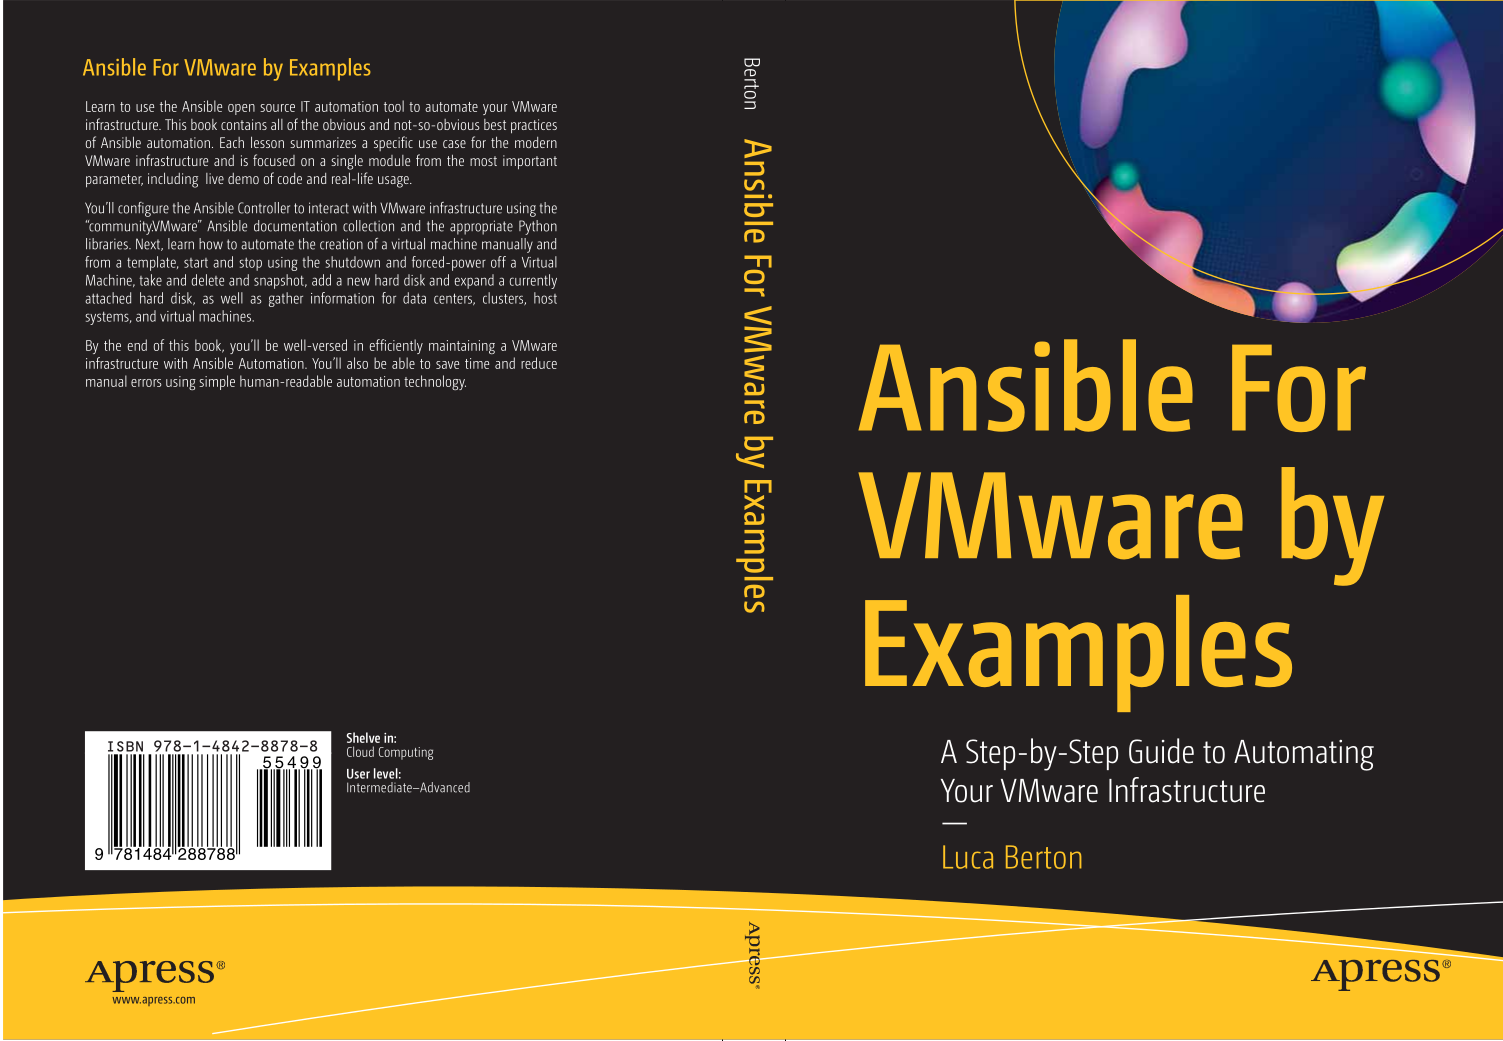 Ansible For VMware By Examples with Apress book